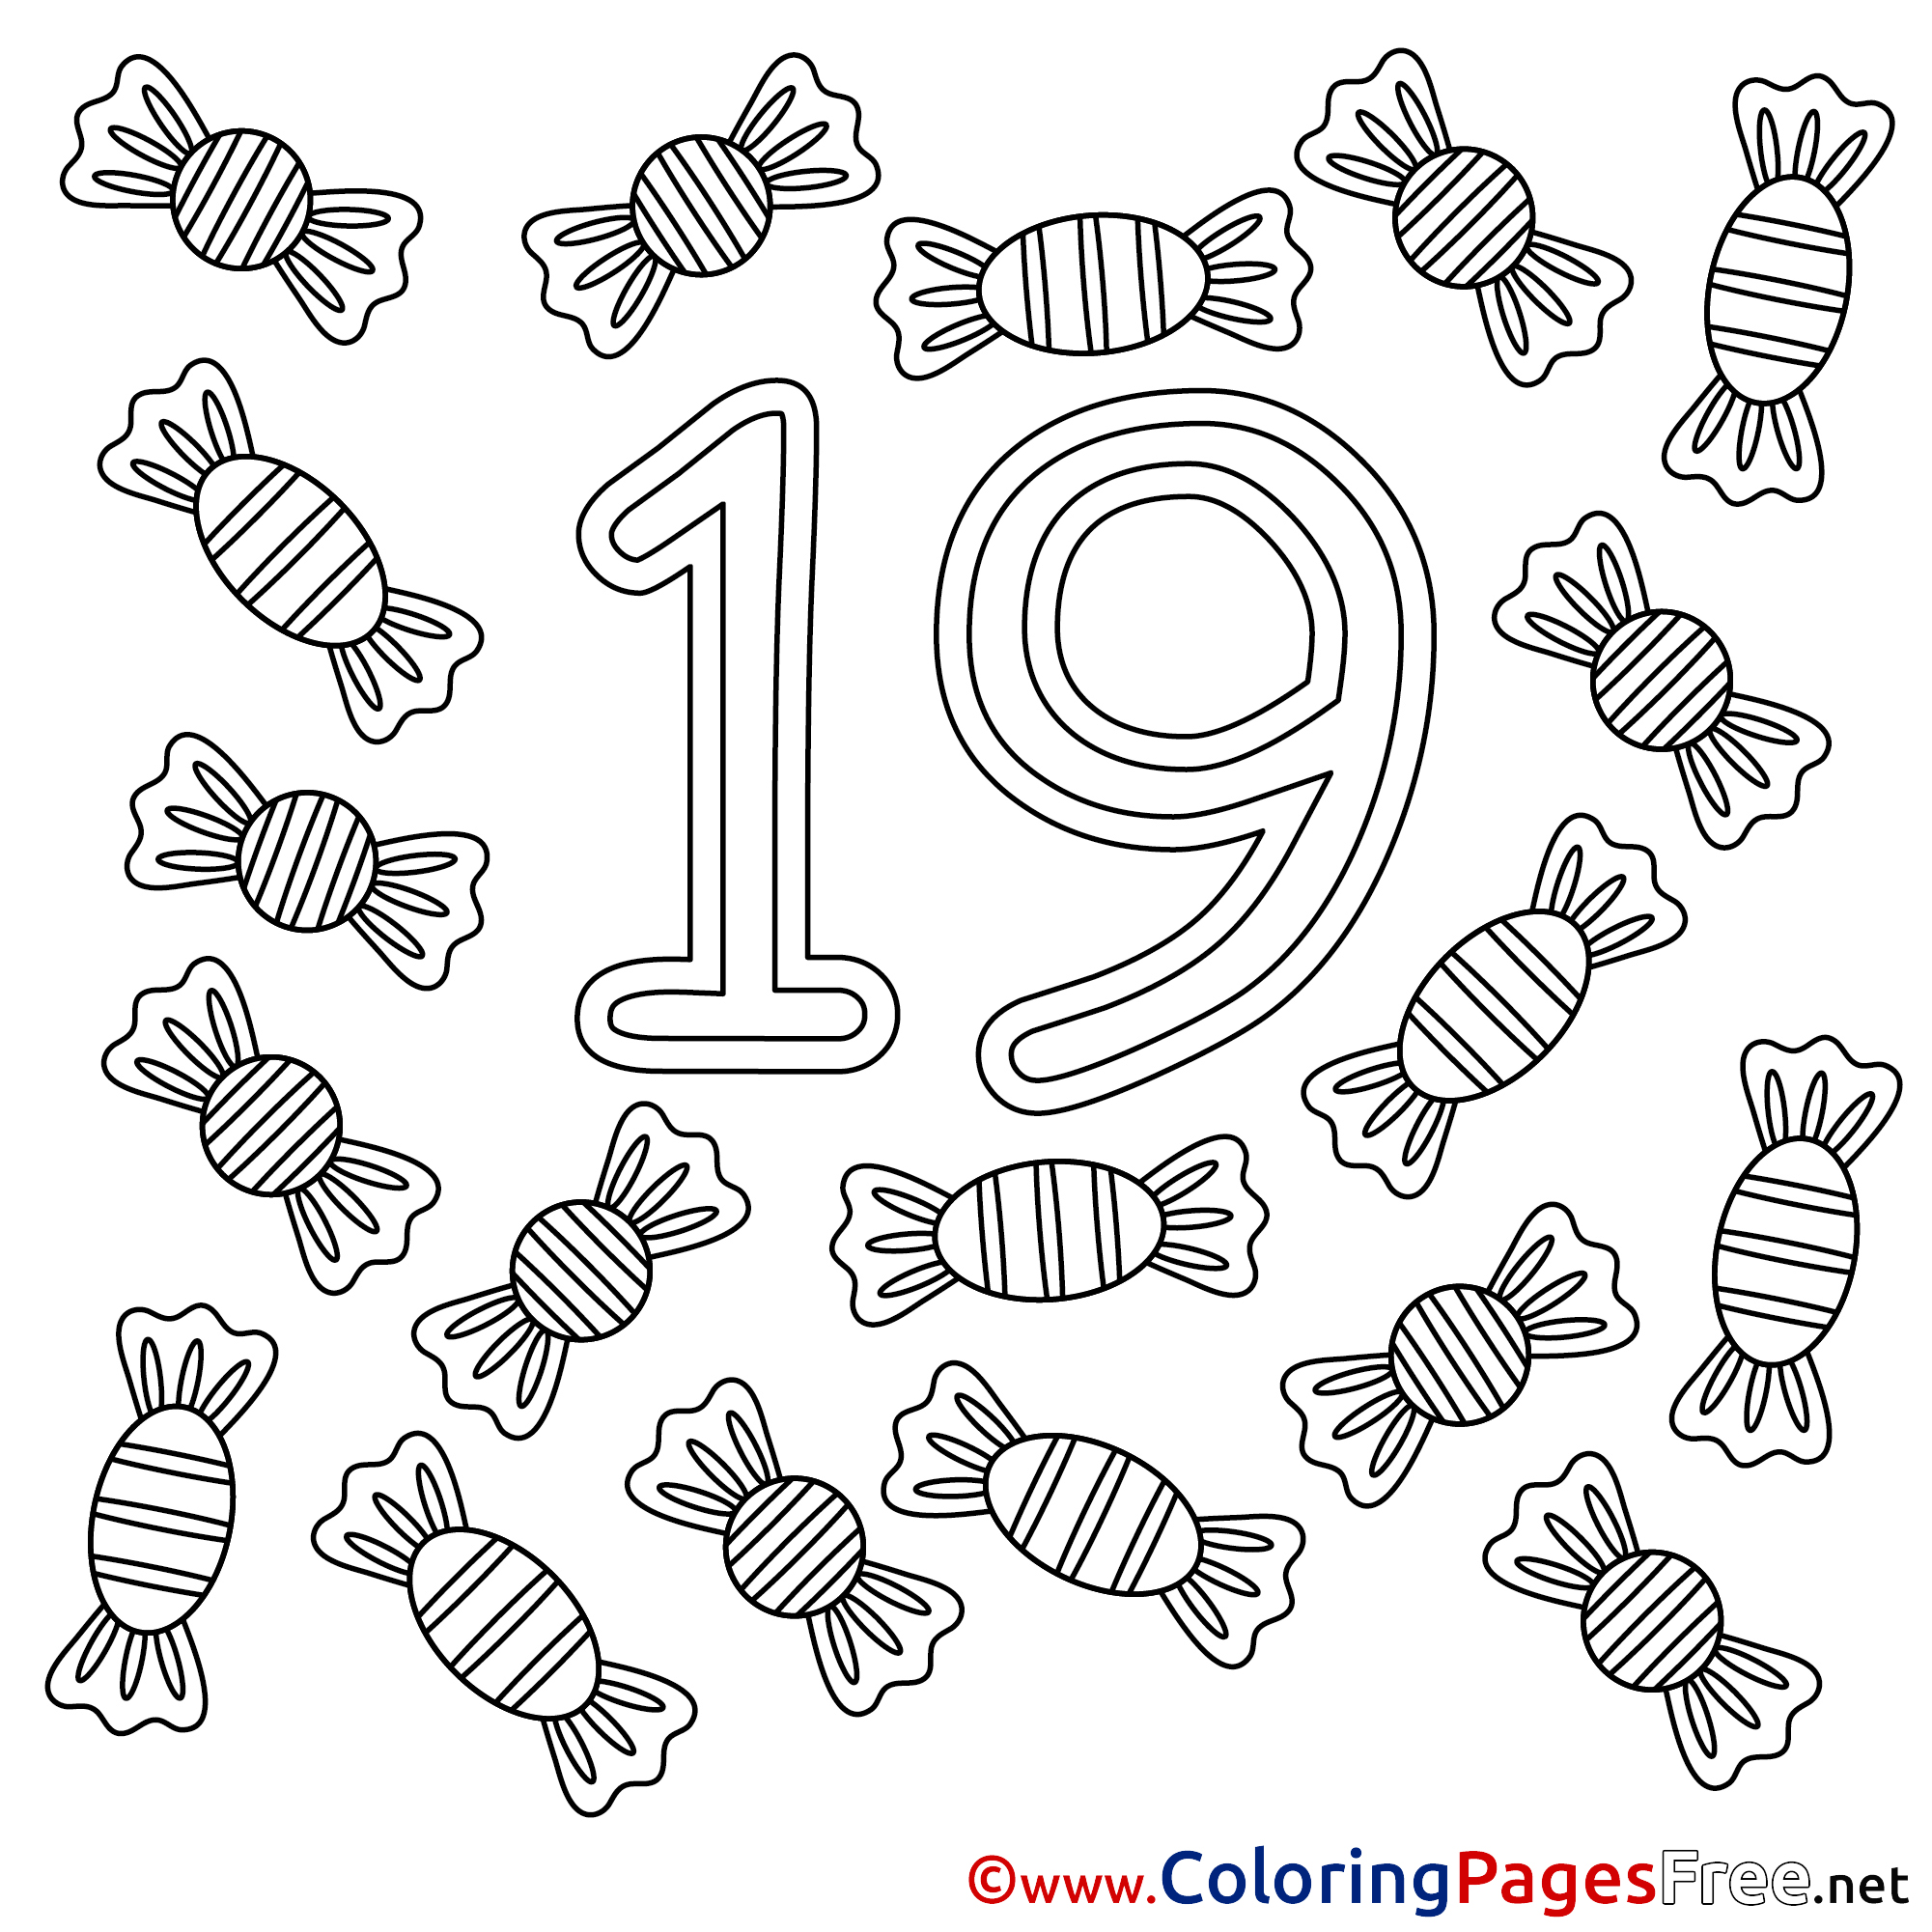 Candies free colouring page numbers